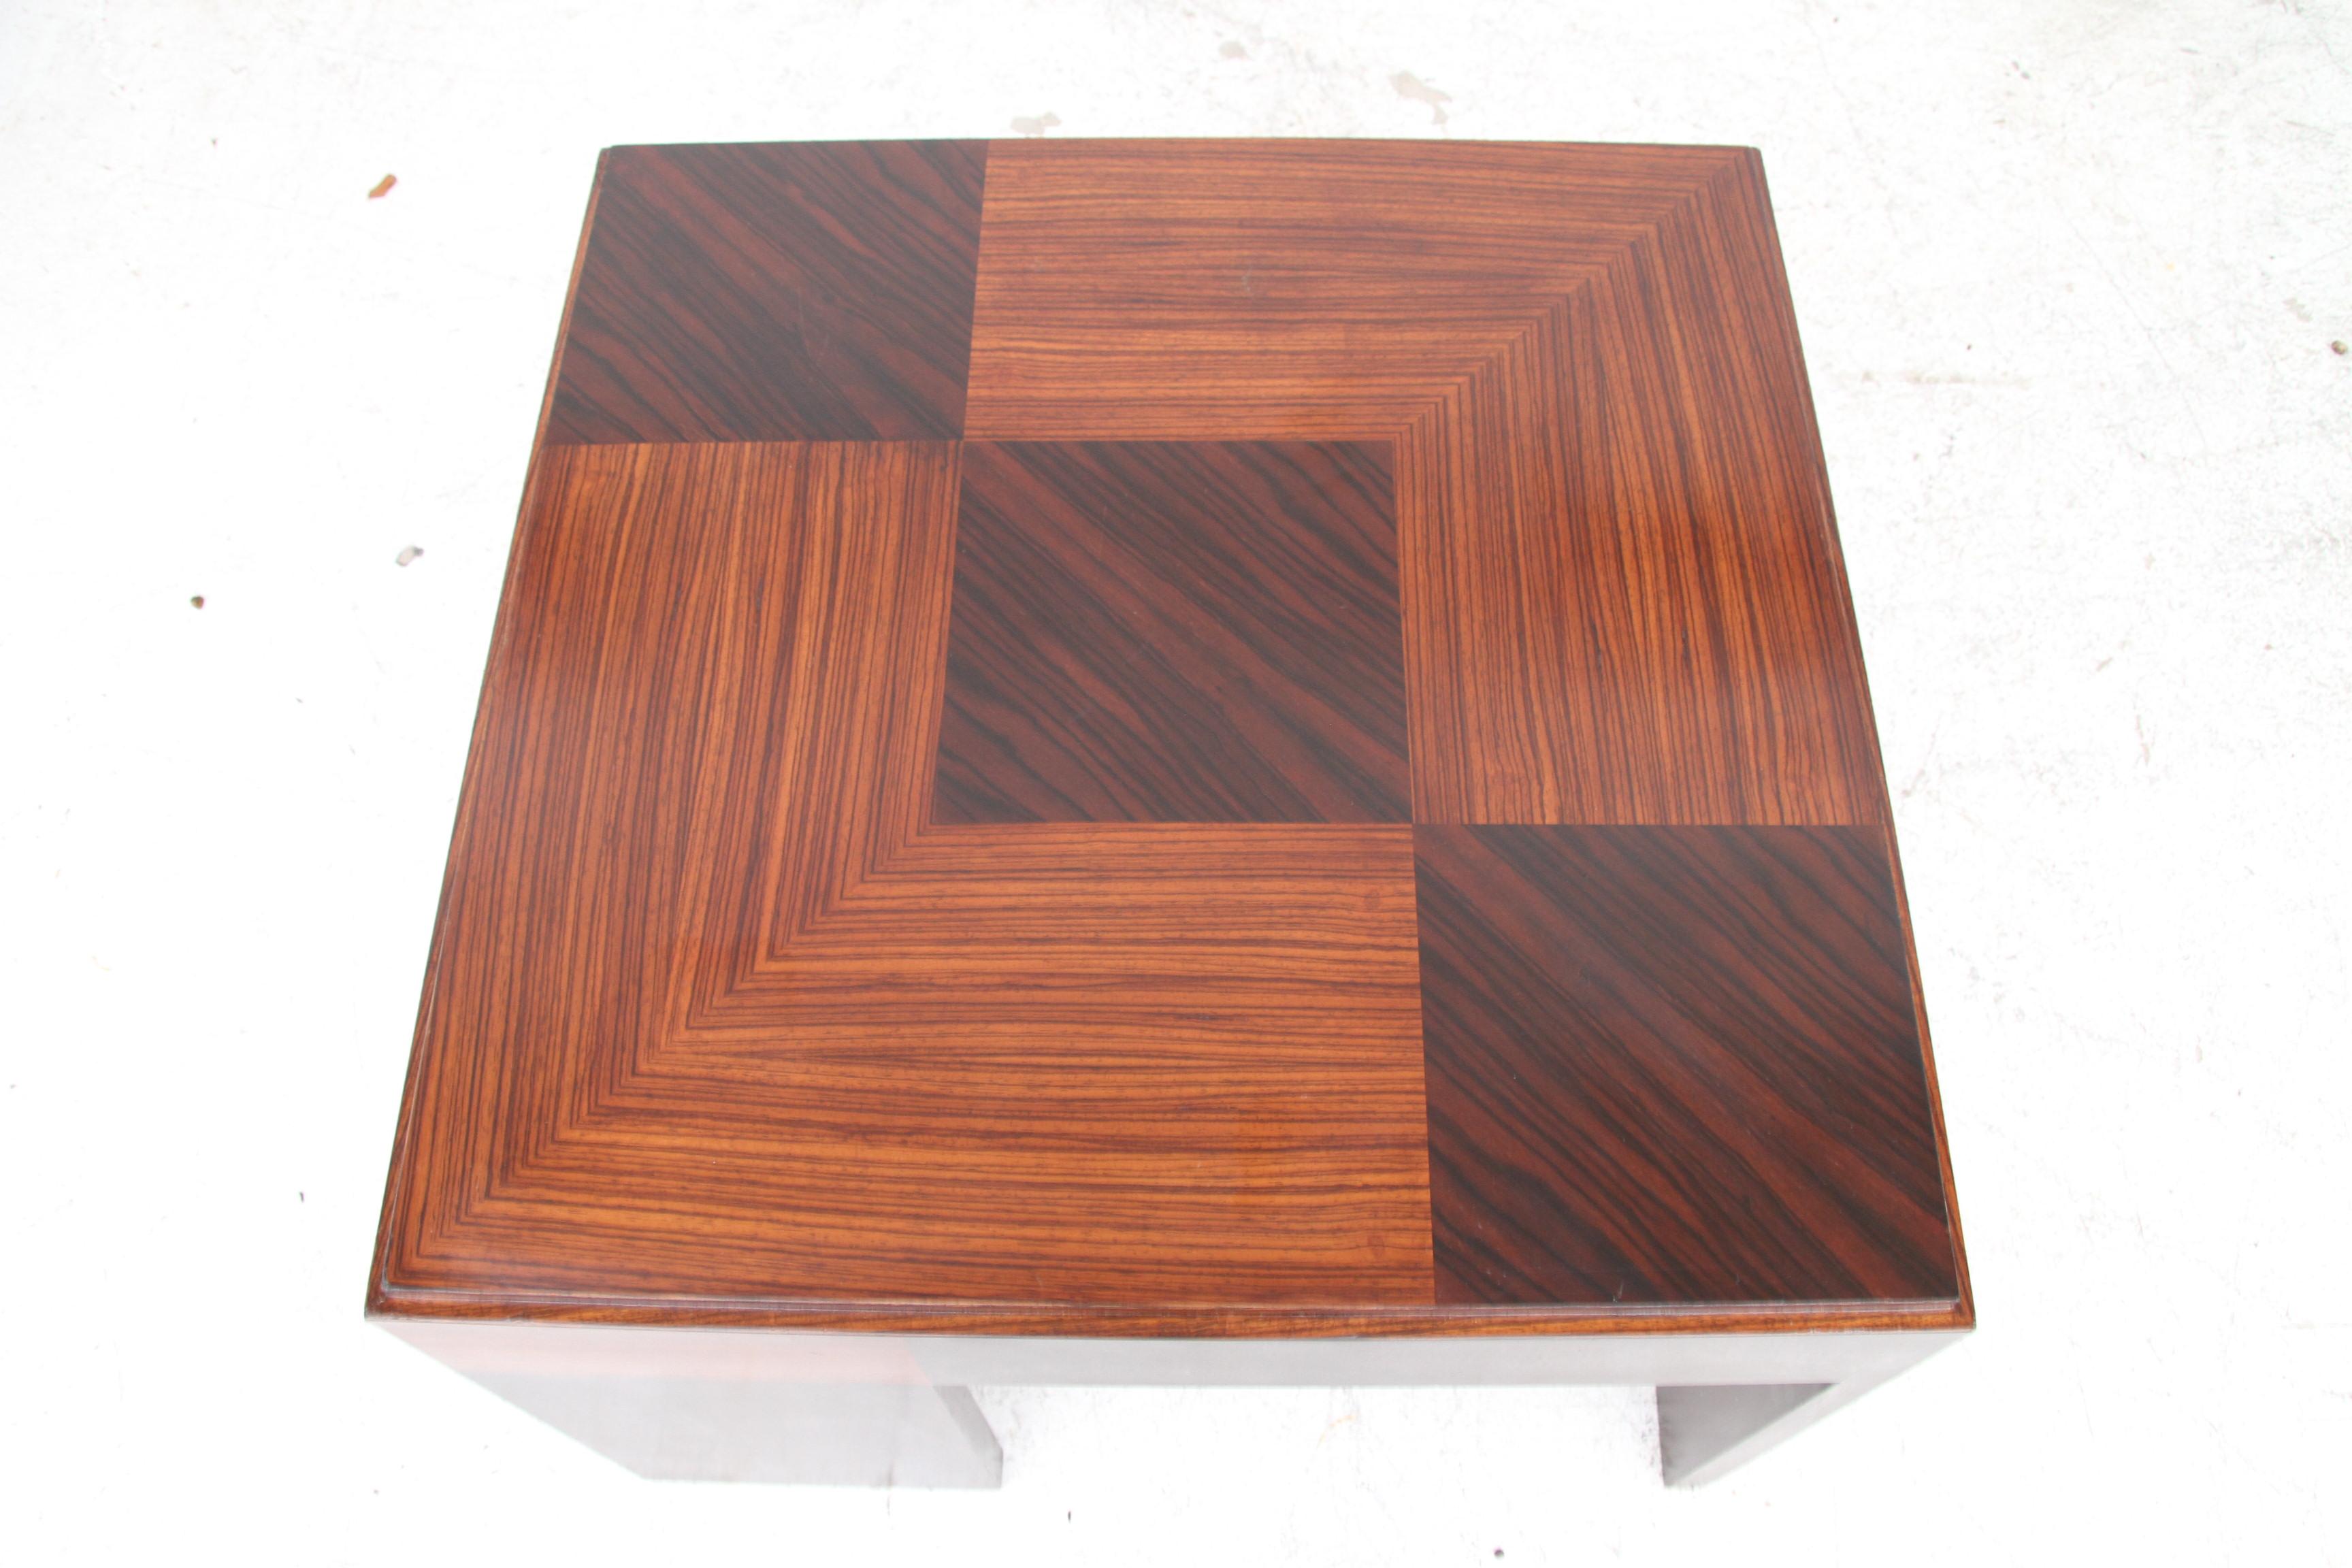 Macassar Ebony Widdicomb Side Table.

John Widdicomb side or coffee table. Patchwork design in bleached and ebony macassar with walnut legs. Manufacturer's mark.